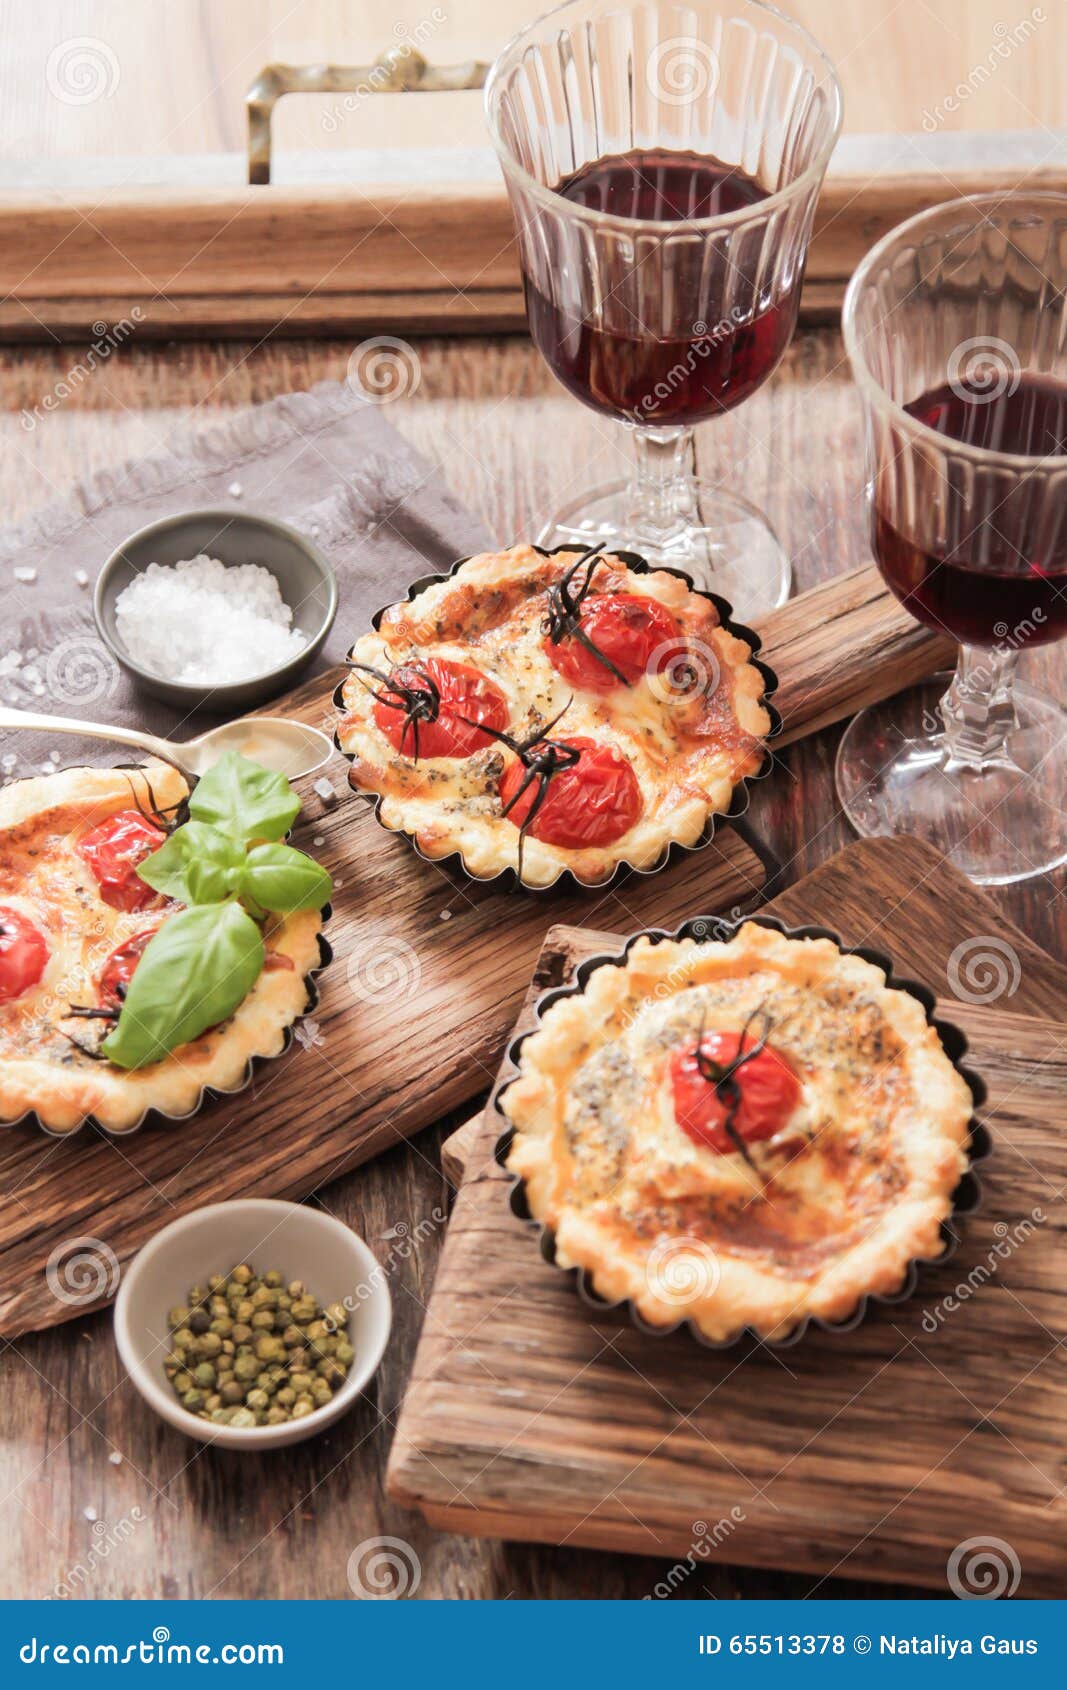 Tomato Quiche with Wine the National France Stock Photo - Image of leek ...